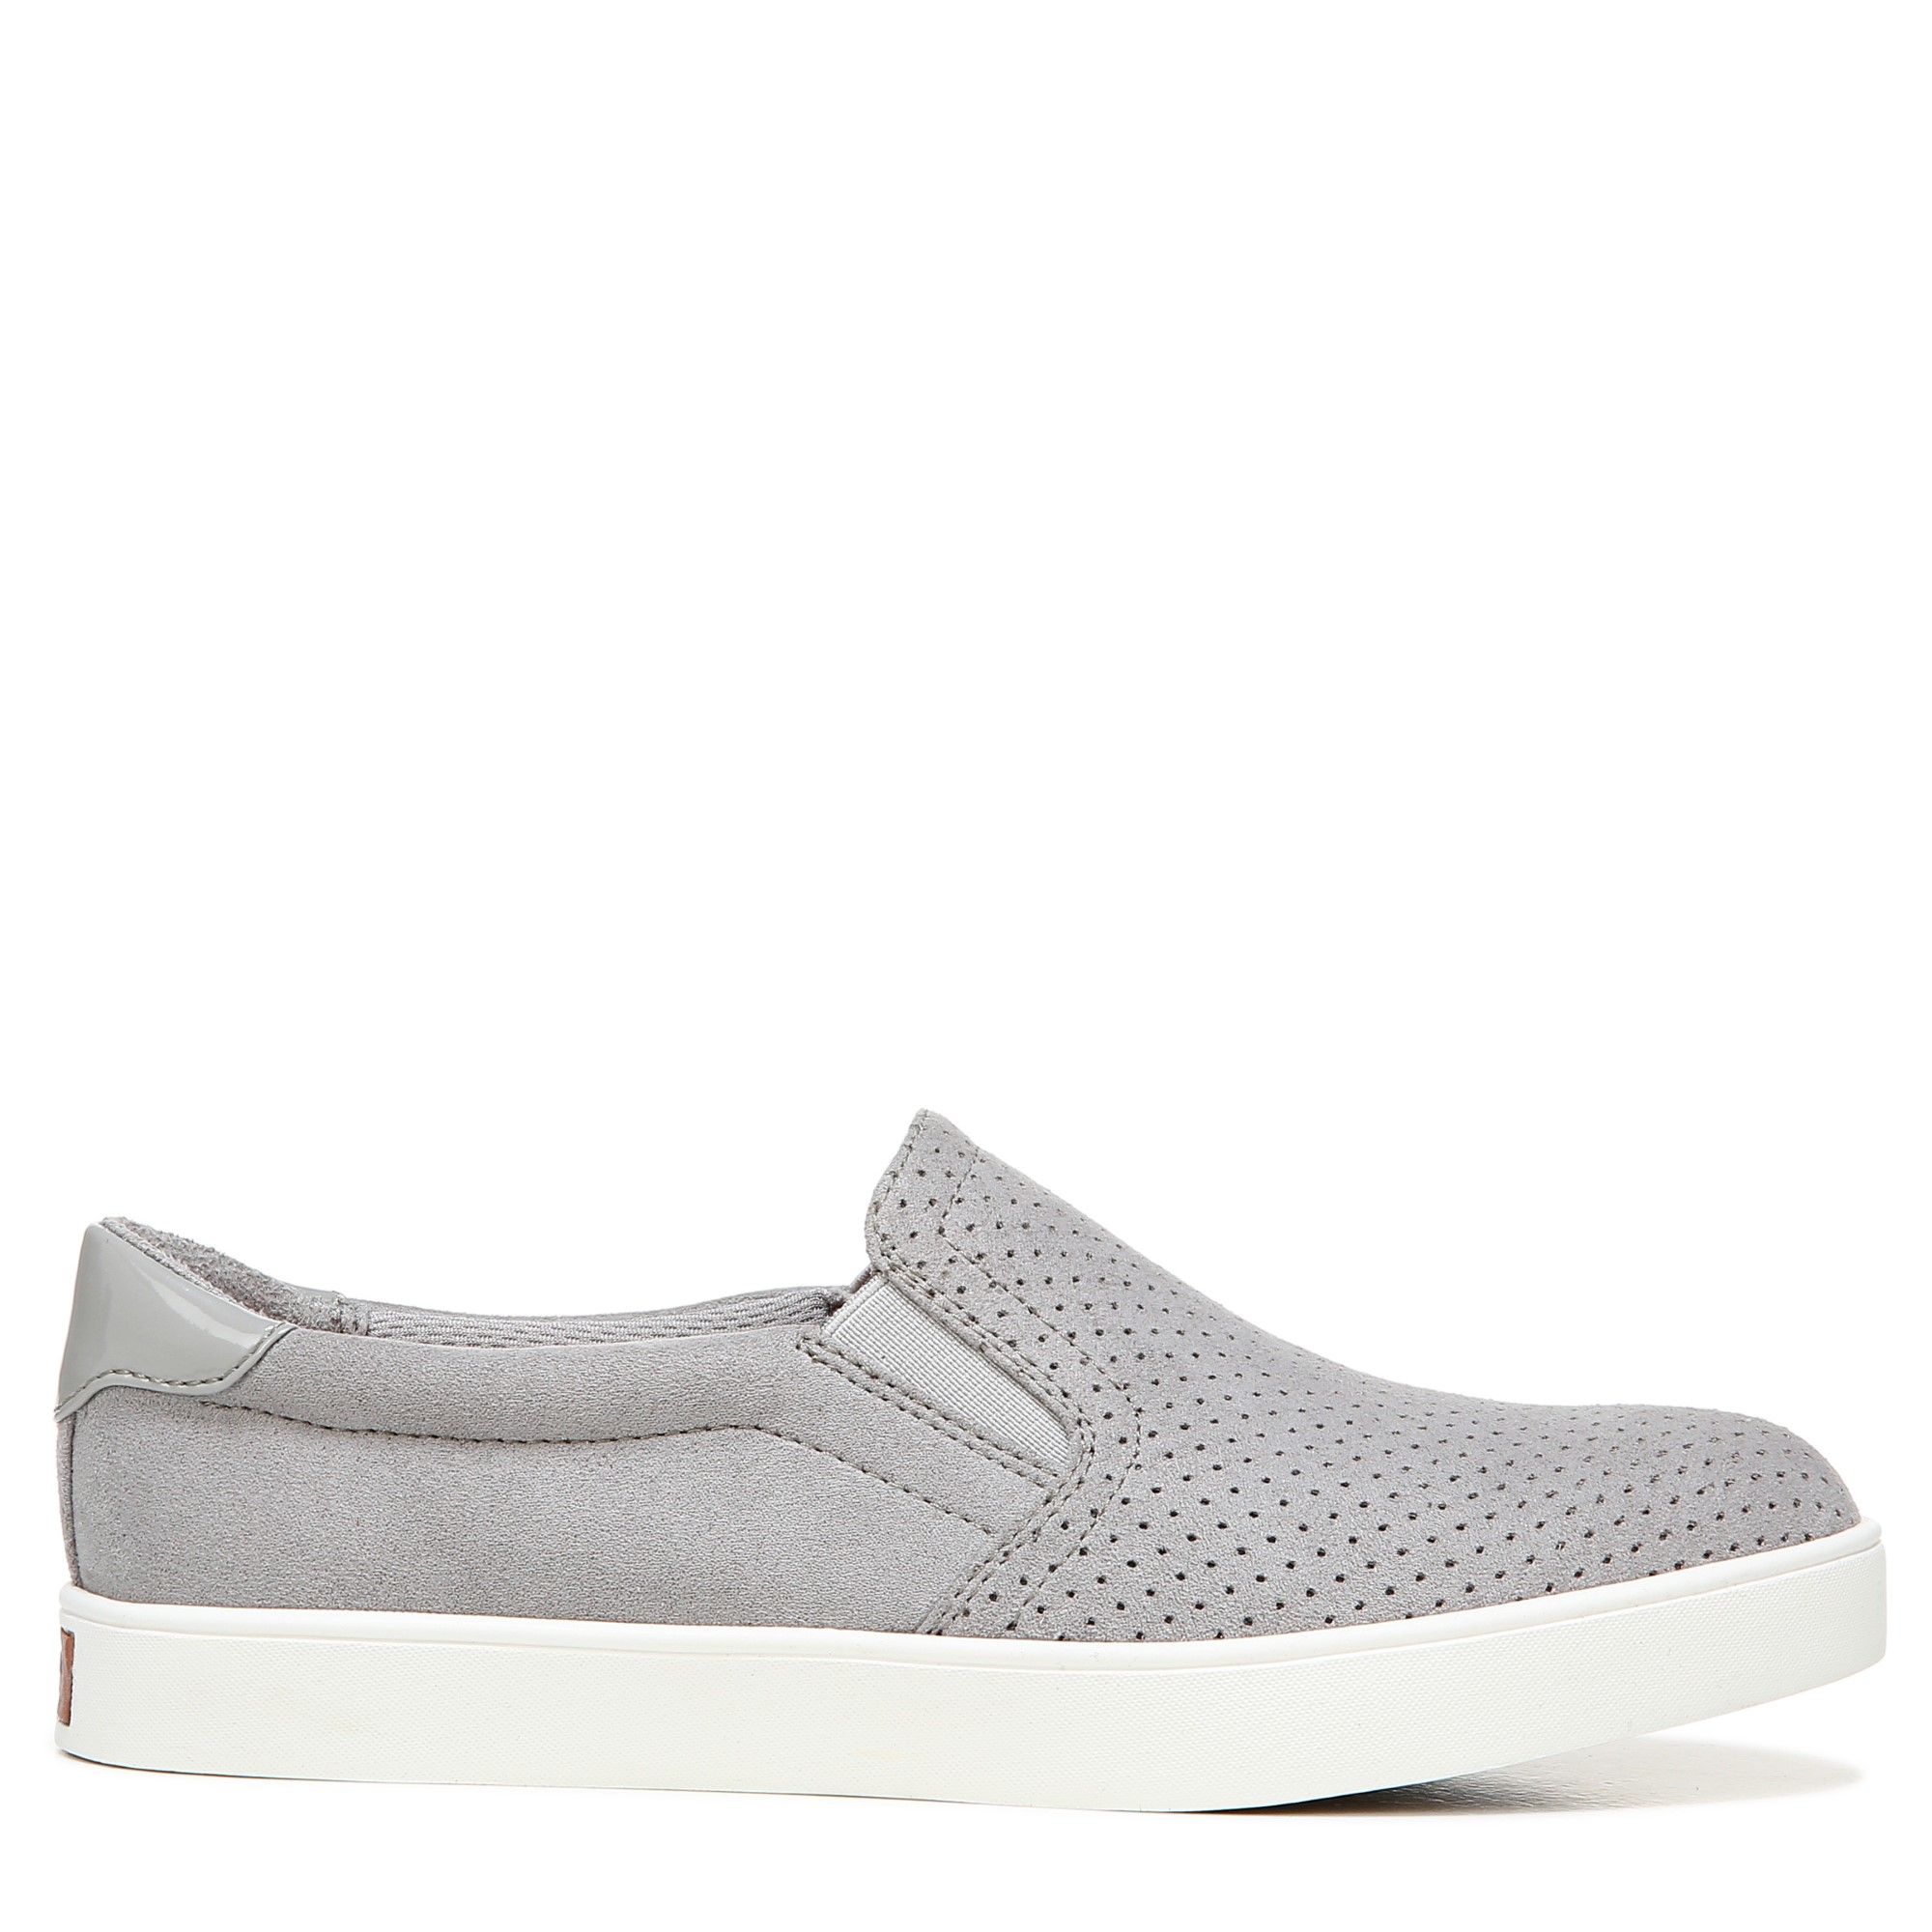 Dr. Scholl's Madison Sneaker - Sustainably Crafted, Slip-On Fit ...